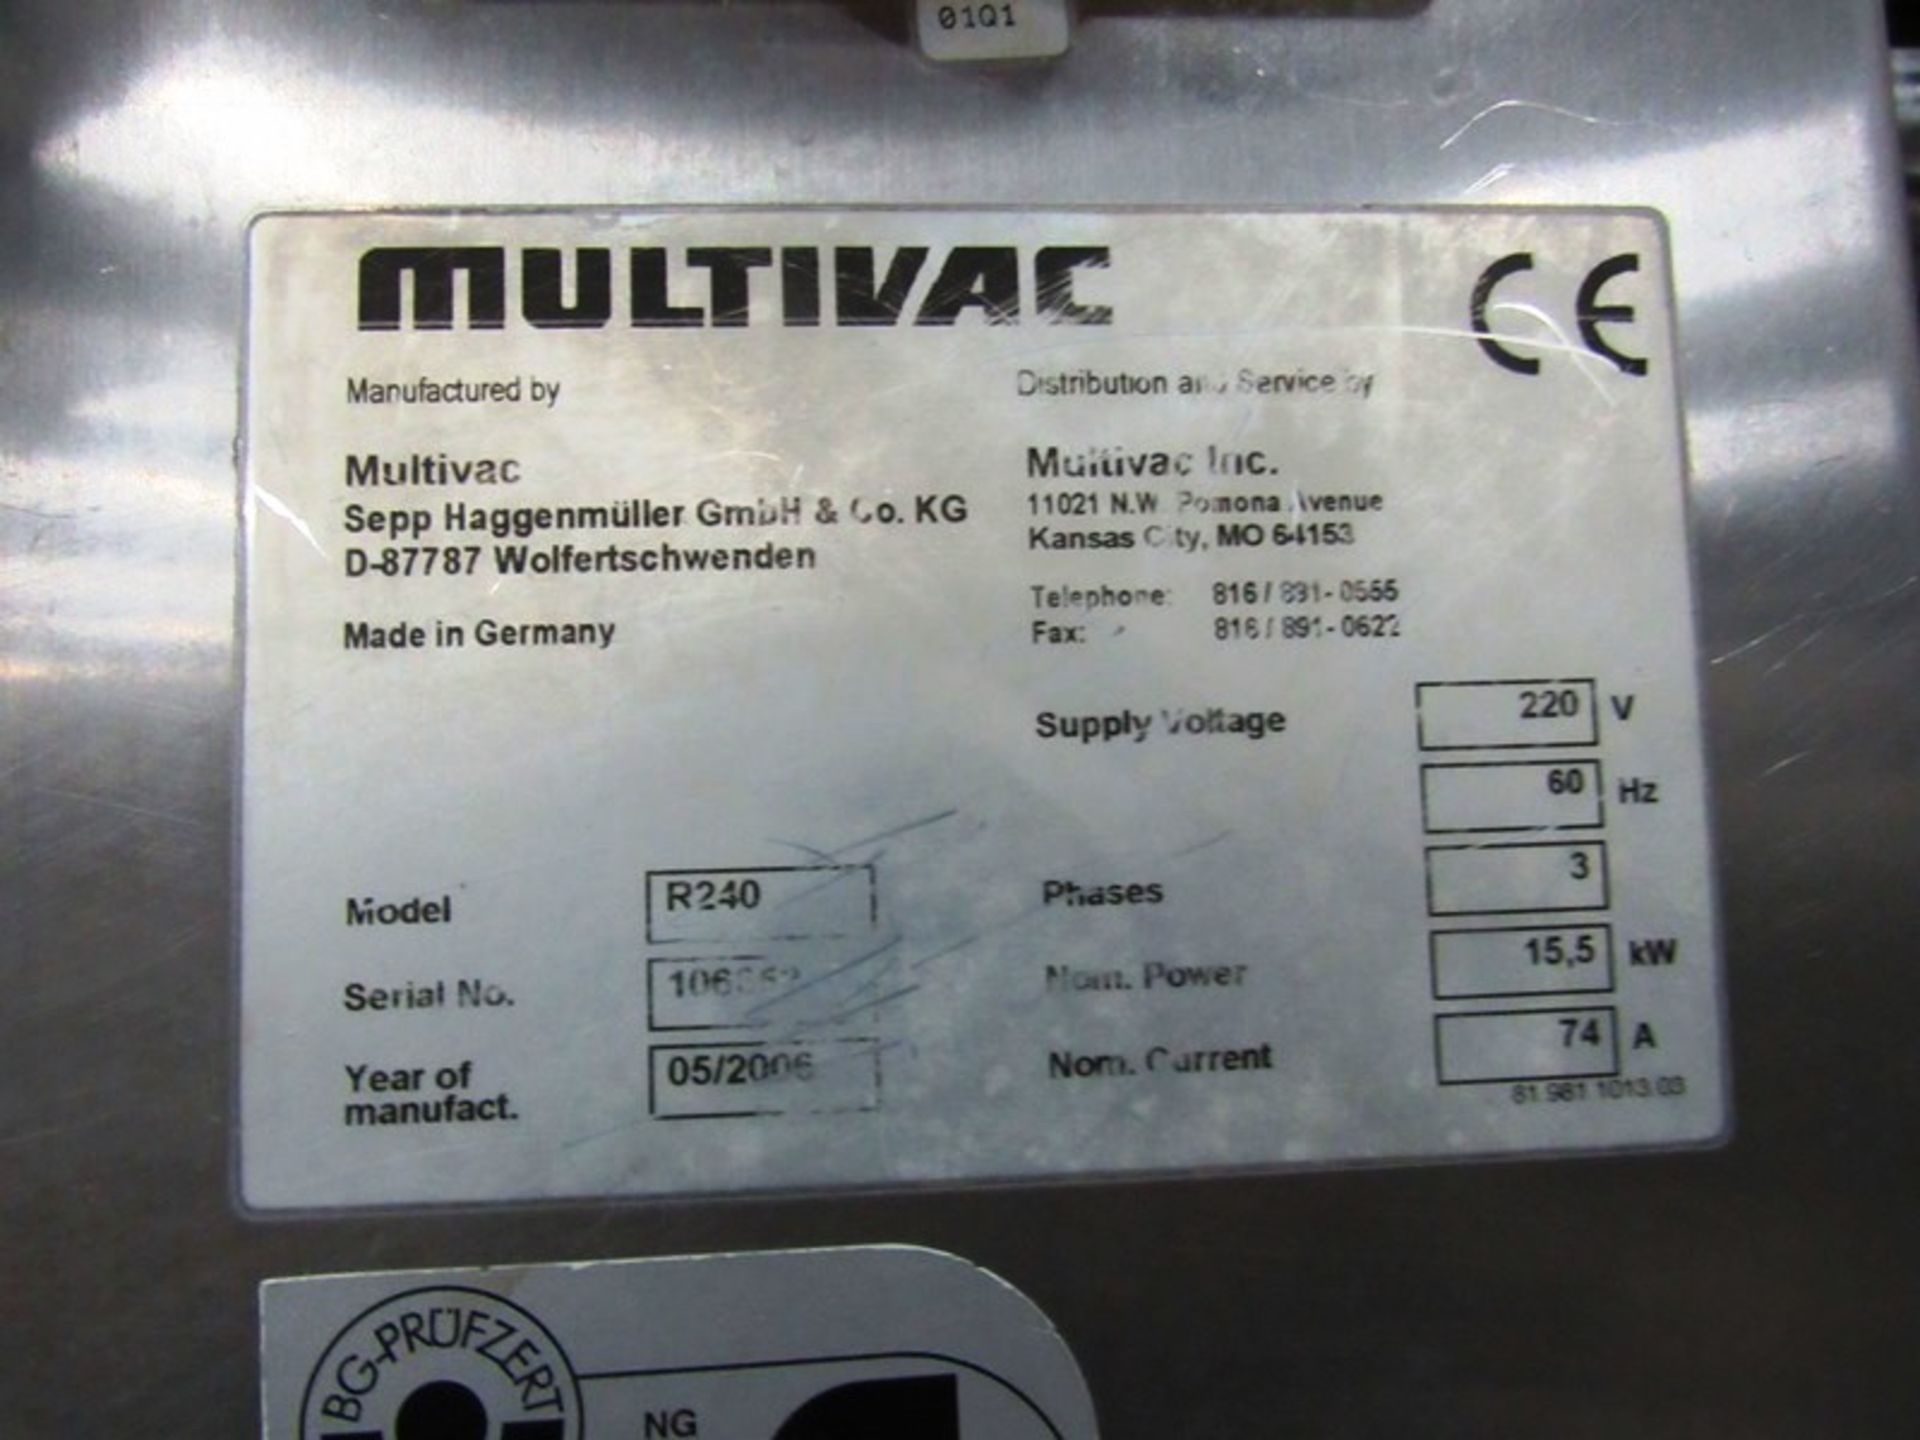 Multivac Mdl. R240 Rollstock Thermoforming Packager, Ser. #106852, approx. 450 mm between chains, - Image 31 of 31